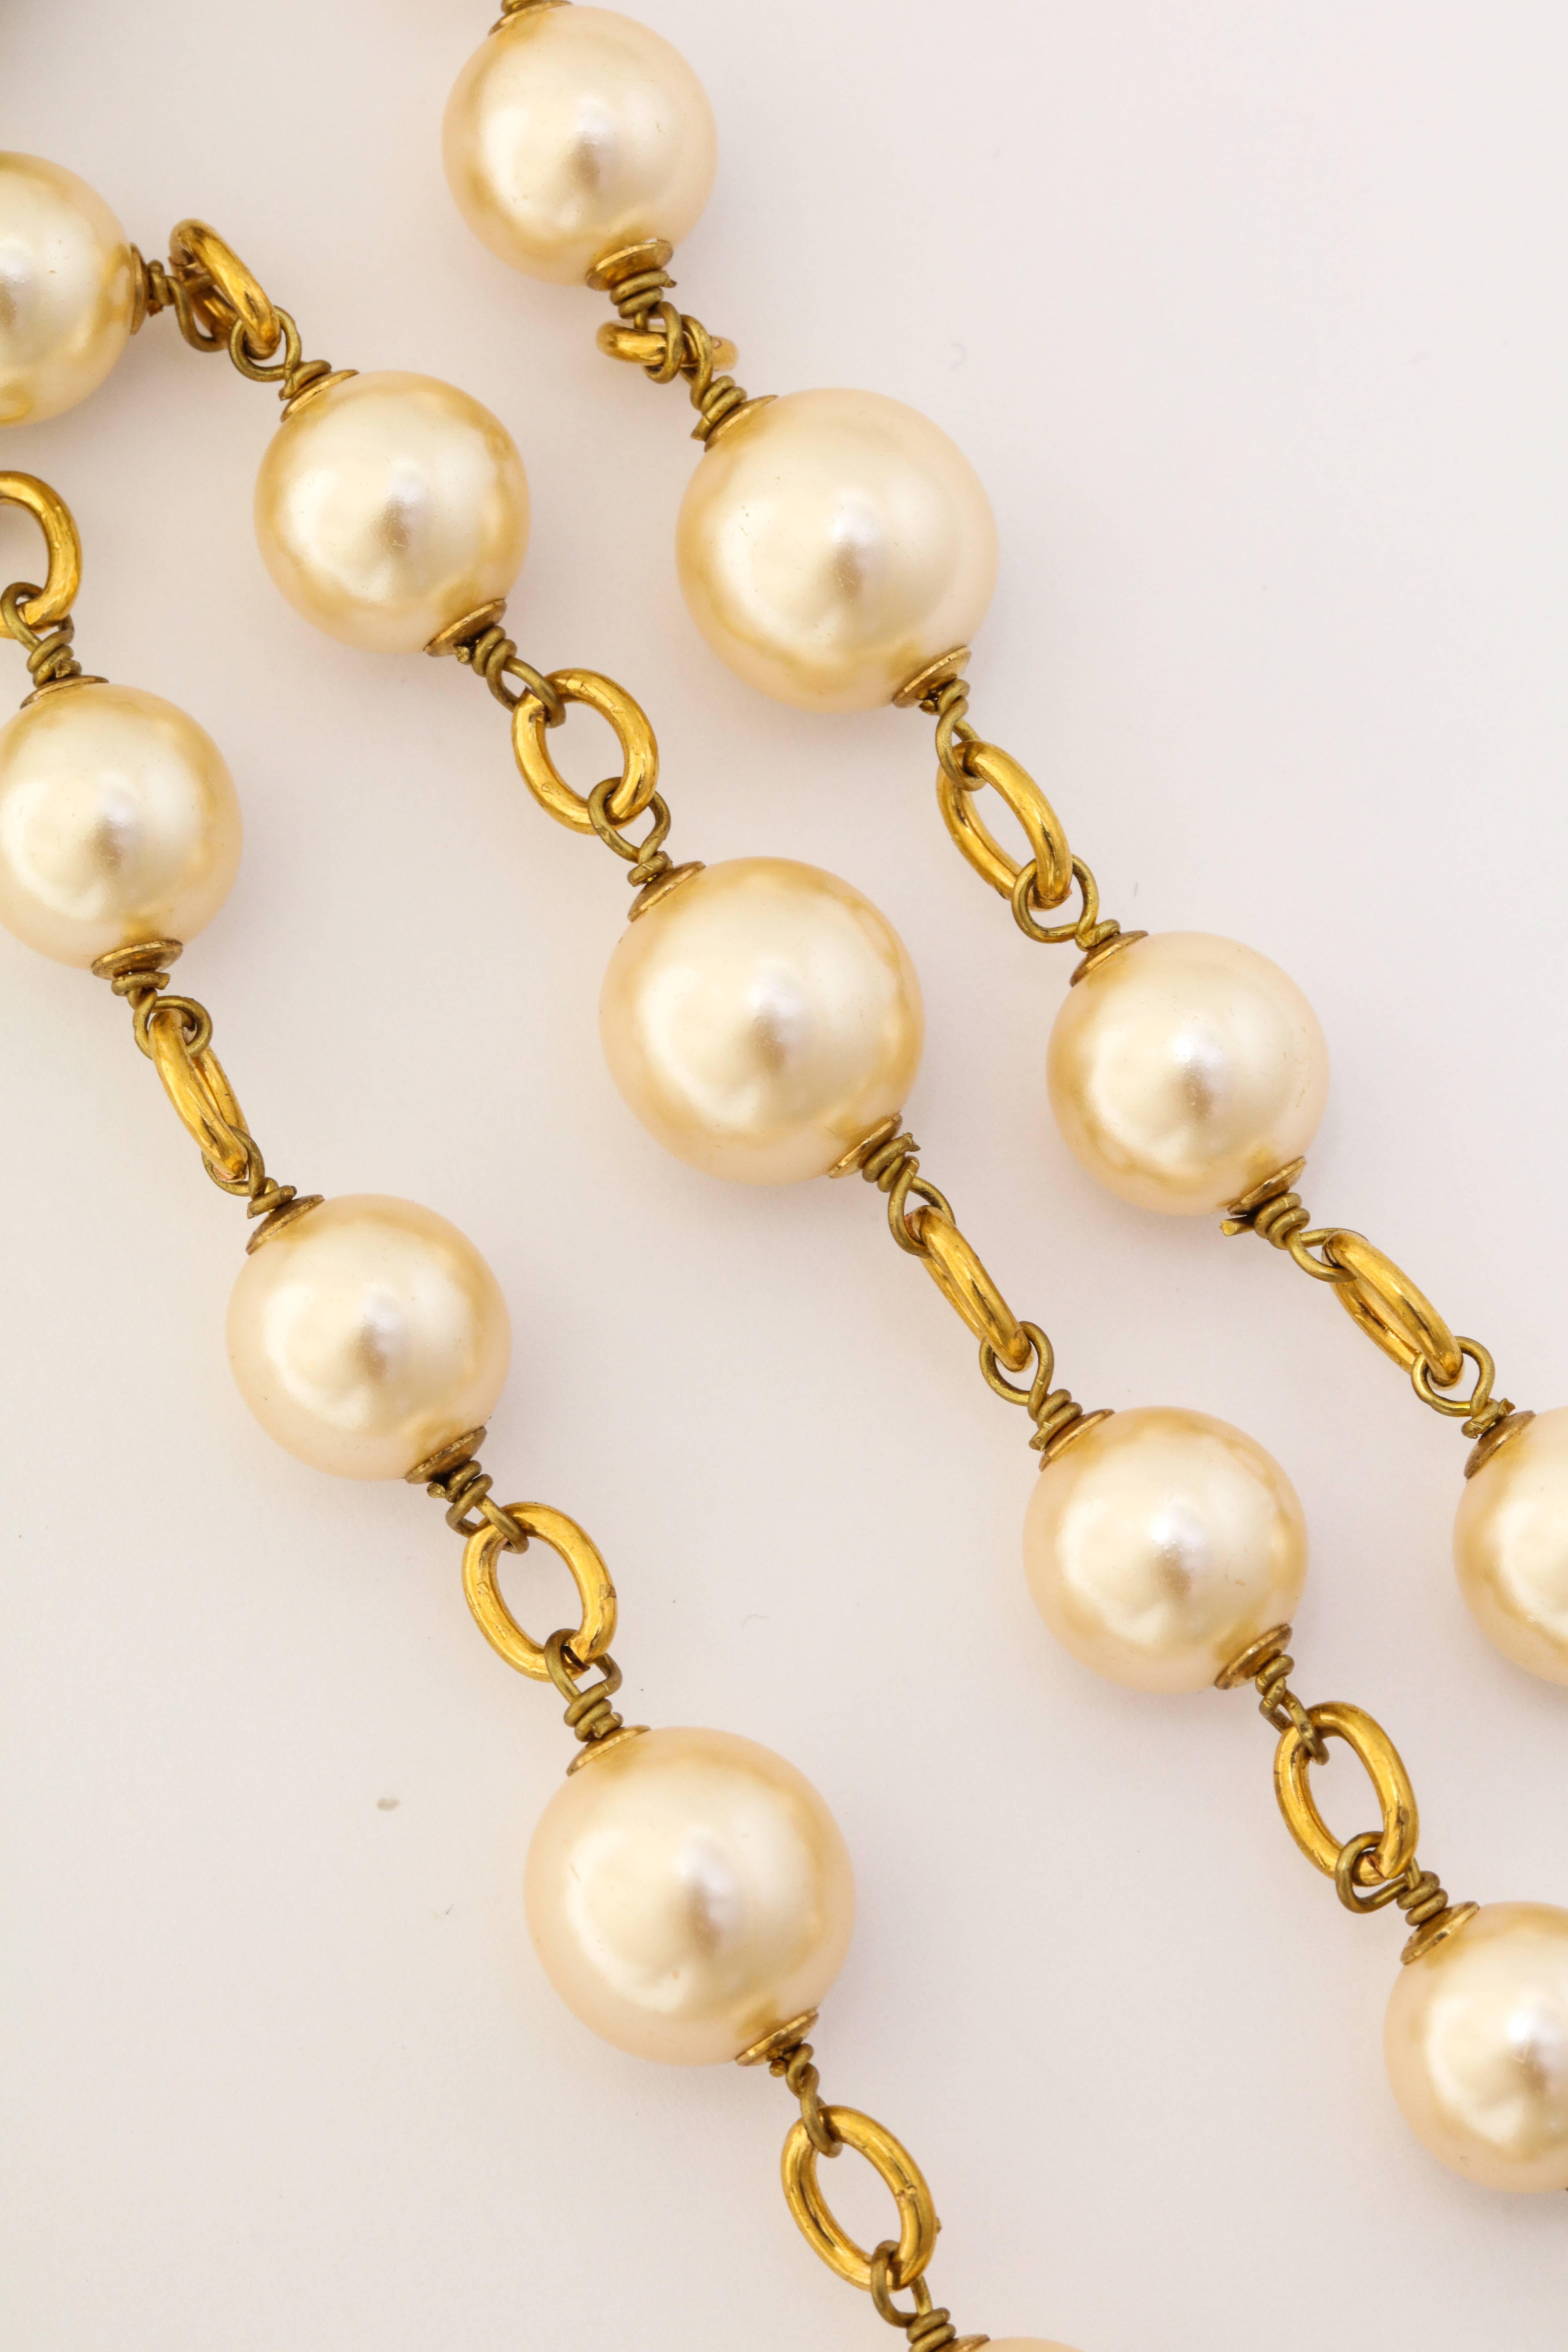 Women's Long Chanel Faux Pearl and Glass Necklace